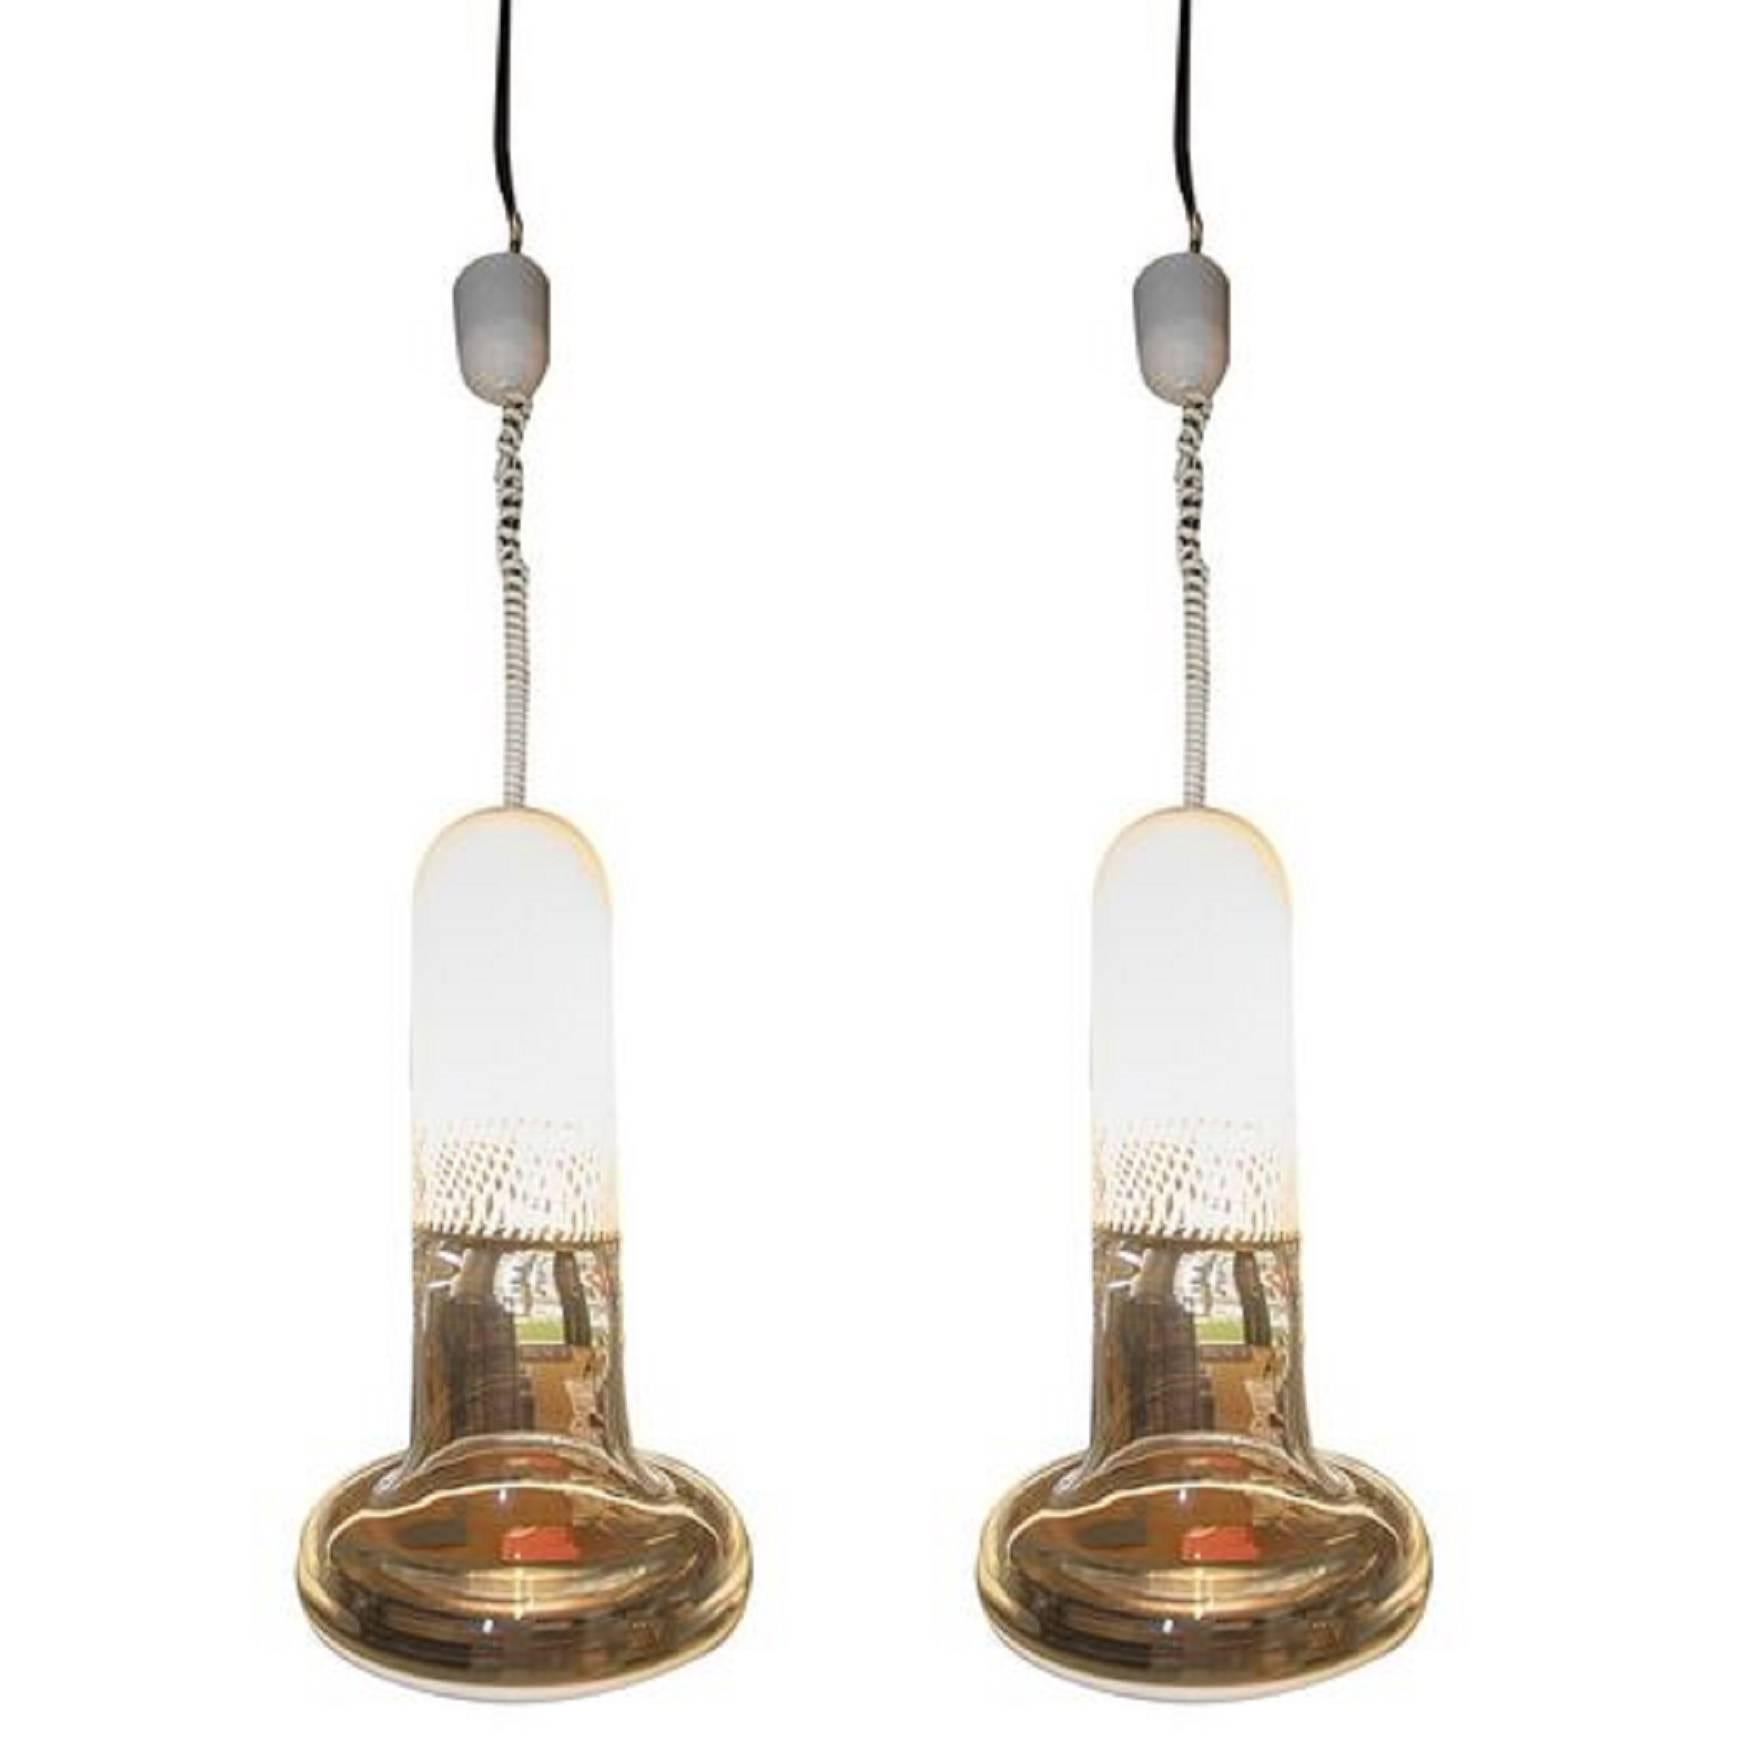 Pair of Mid-Century Murano Glass Ceiling Lamps by VeArt, Venice, Italy, 1960s For Sale